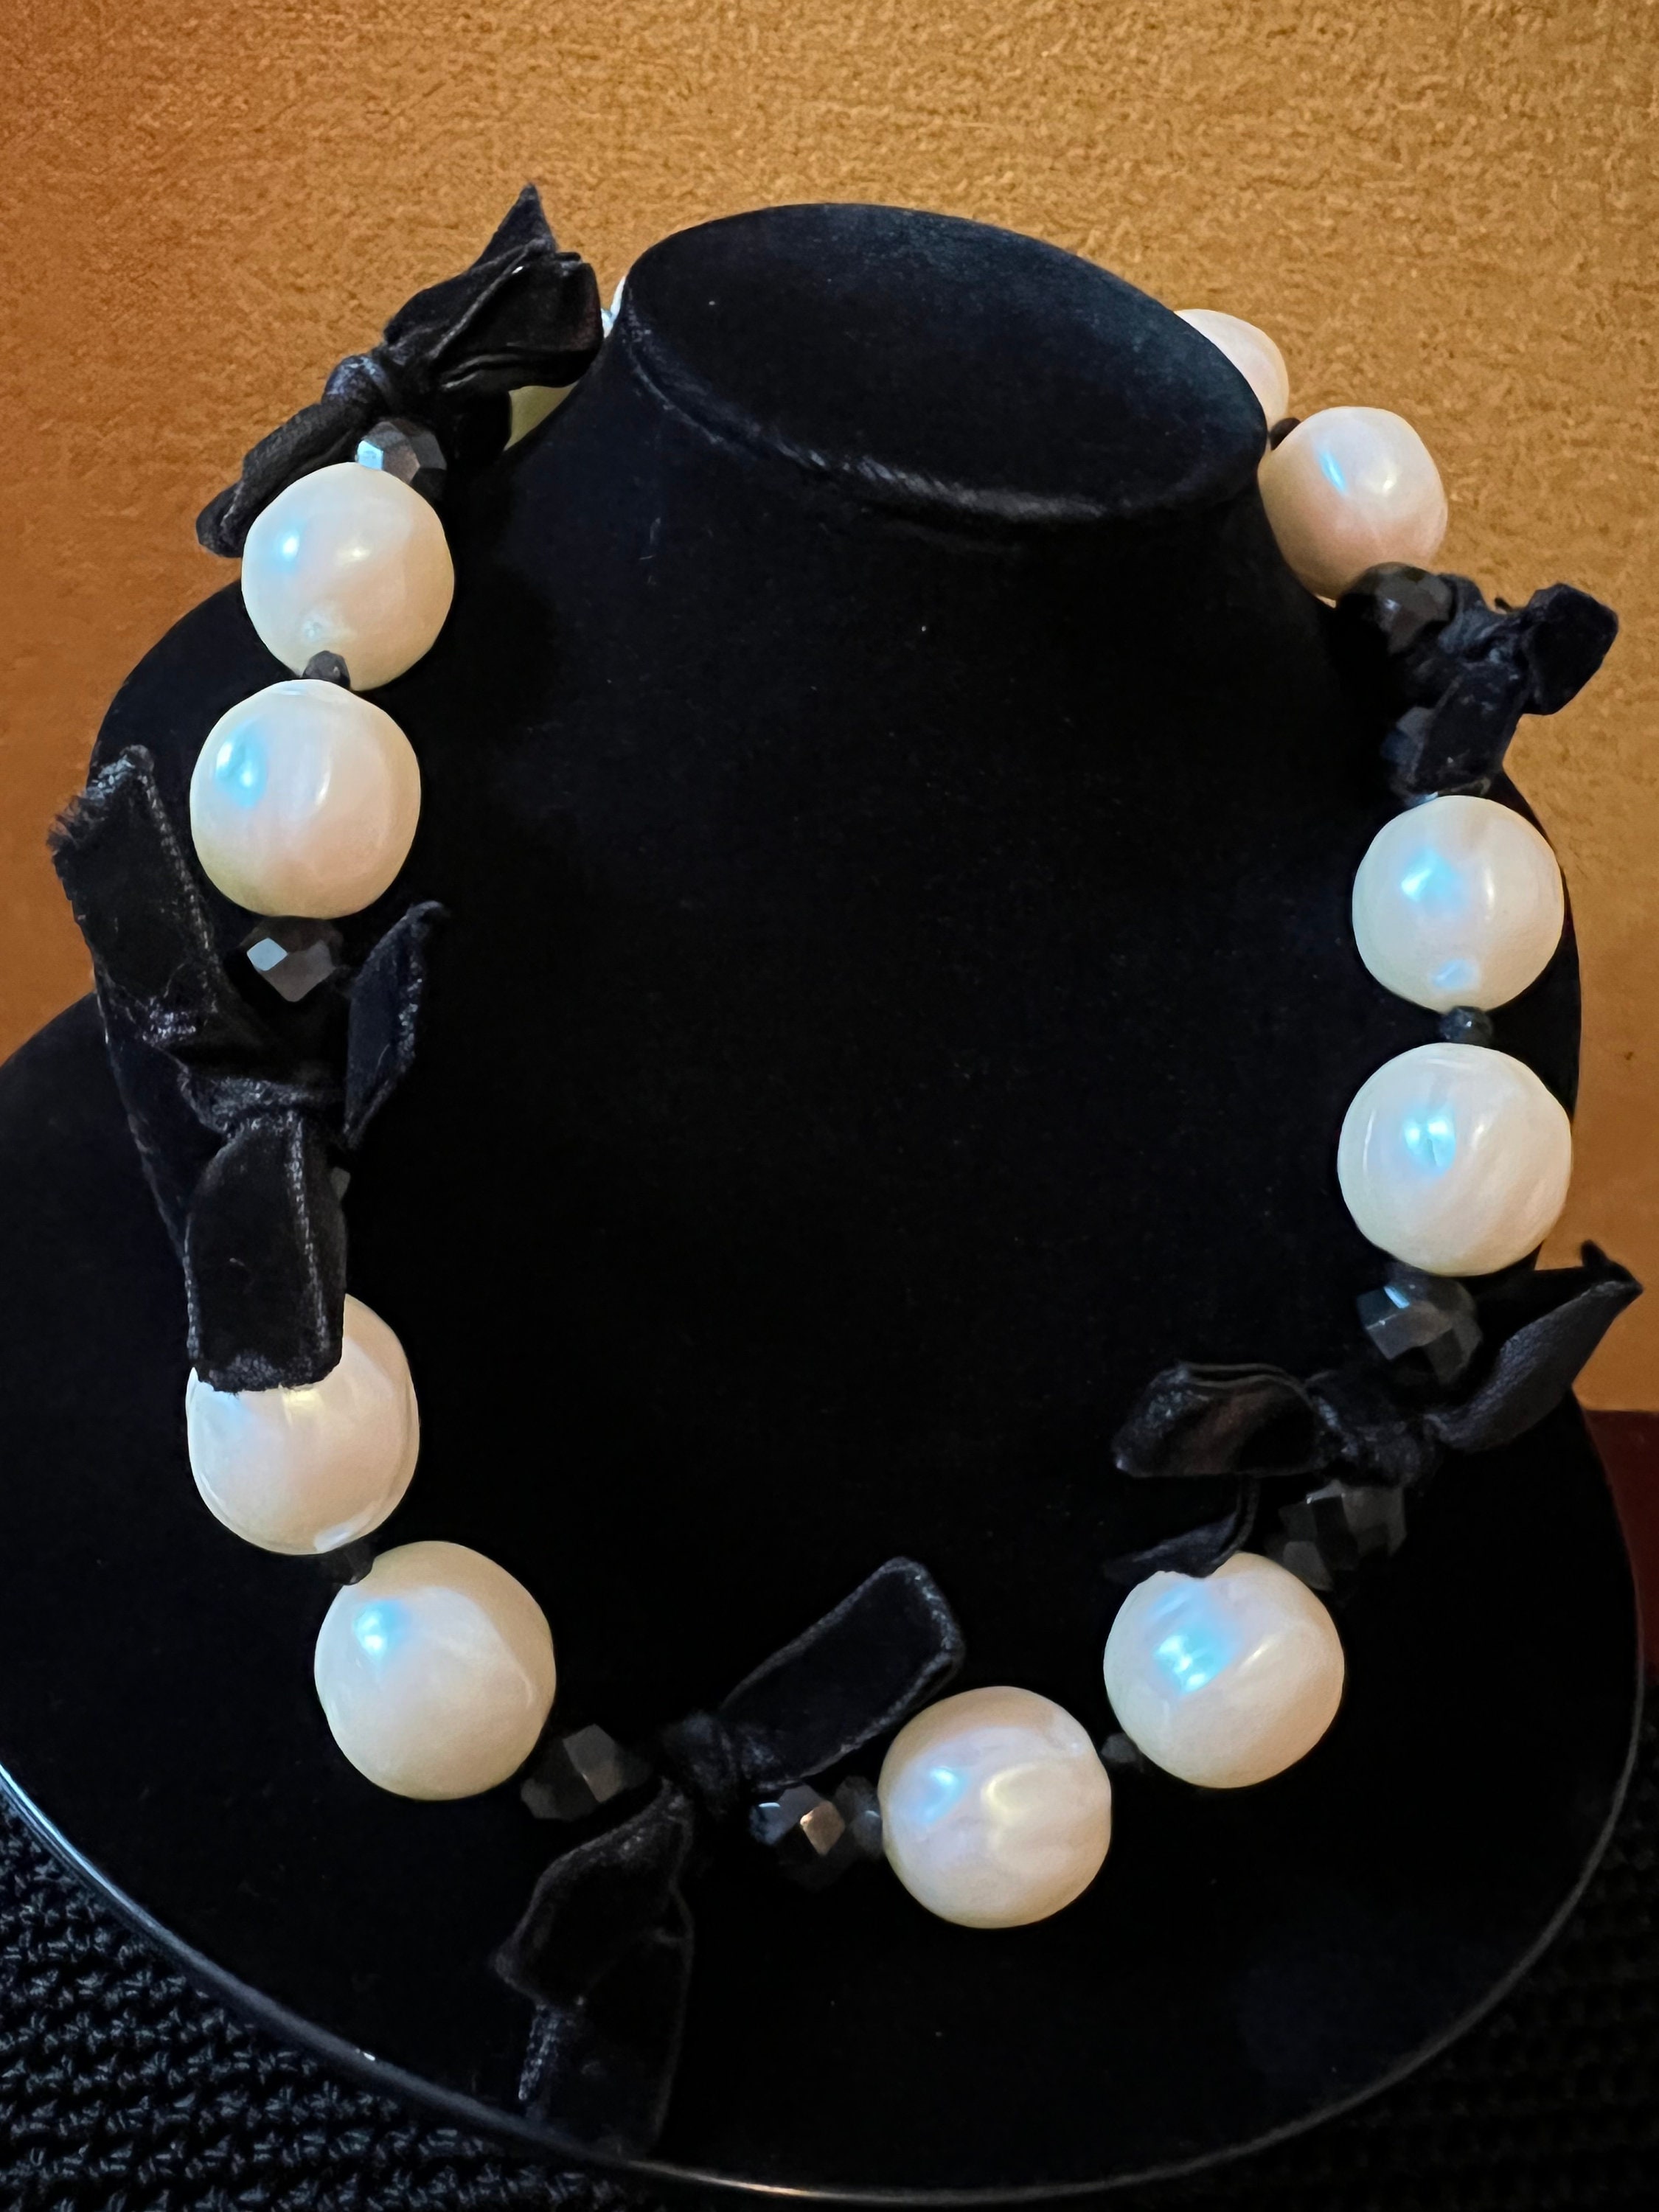 Large Faux Pearl Necklace w/ Black Ribbon Bow & 3 Additional Ribbons Colors